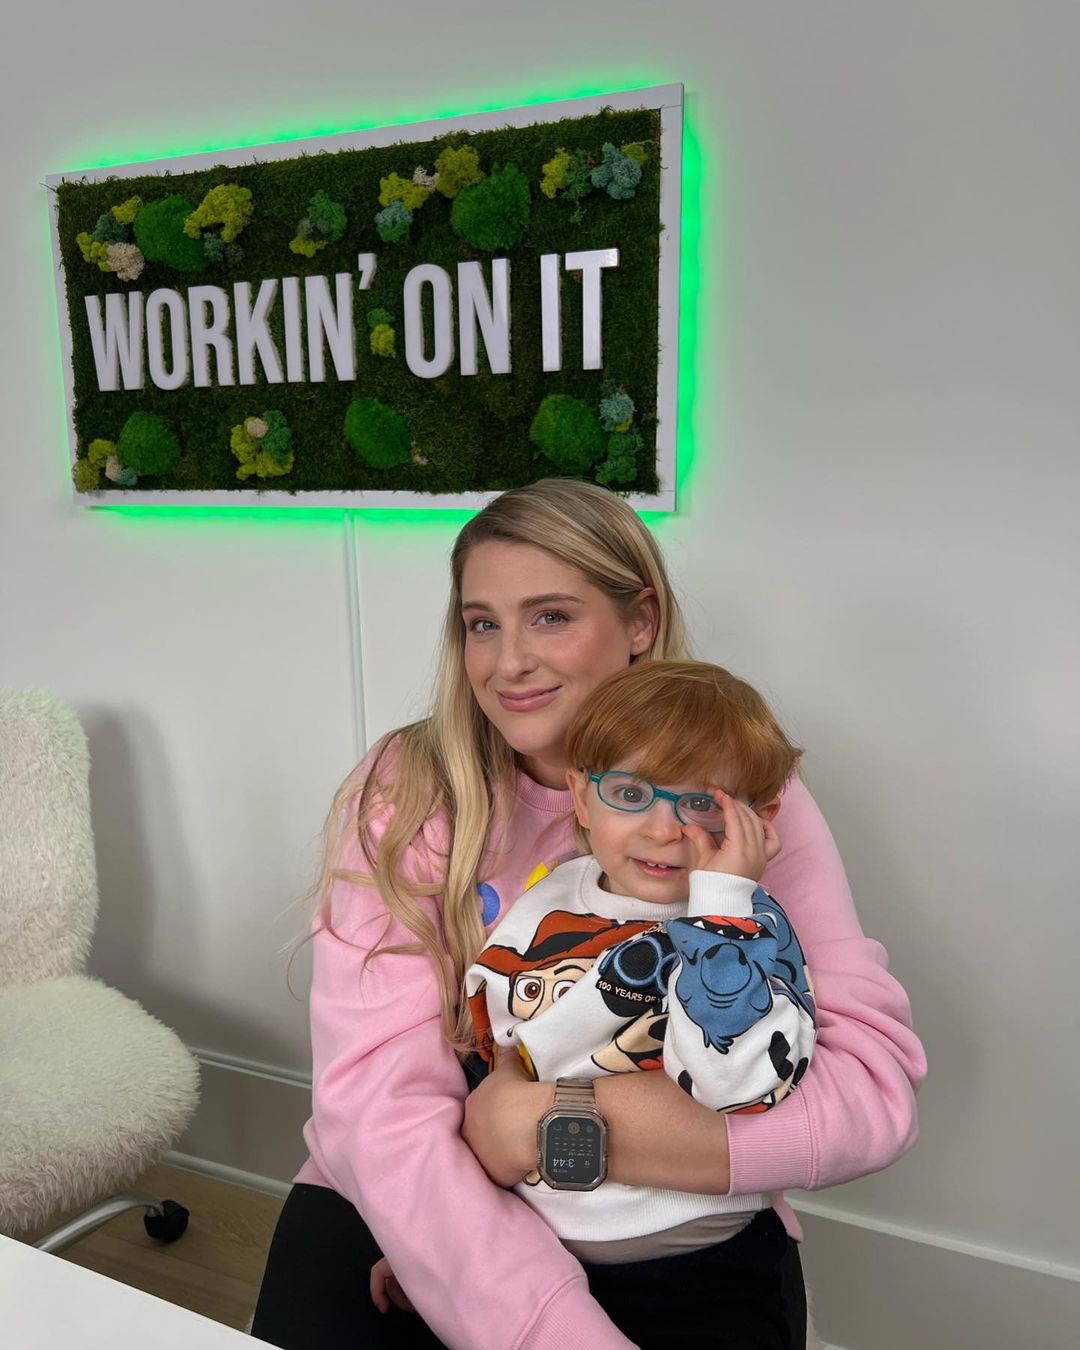 Meghan Trainor's Son Inspiring New Music And More Babies